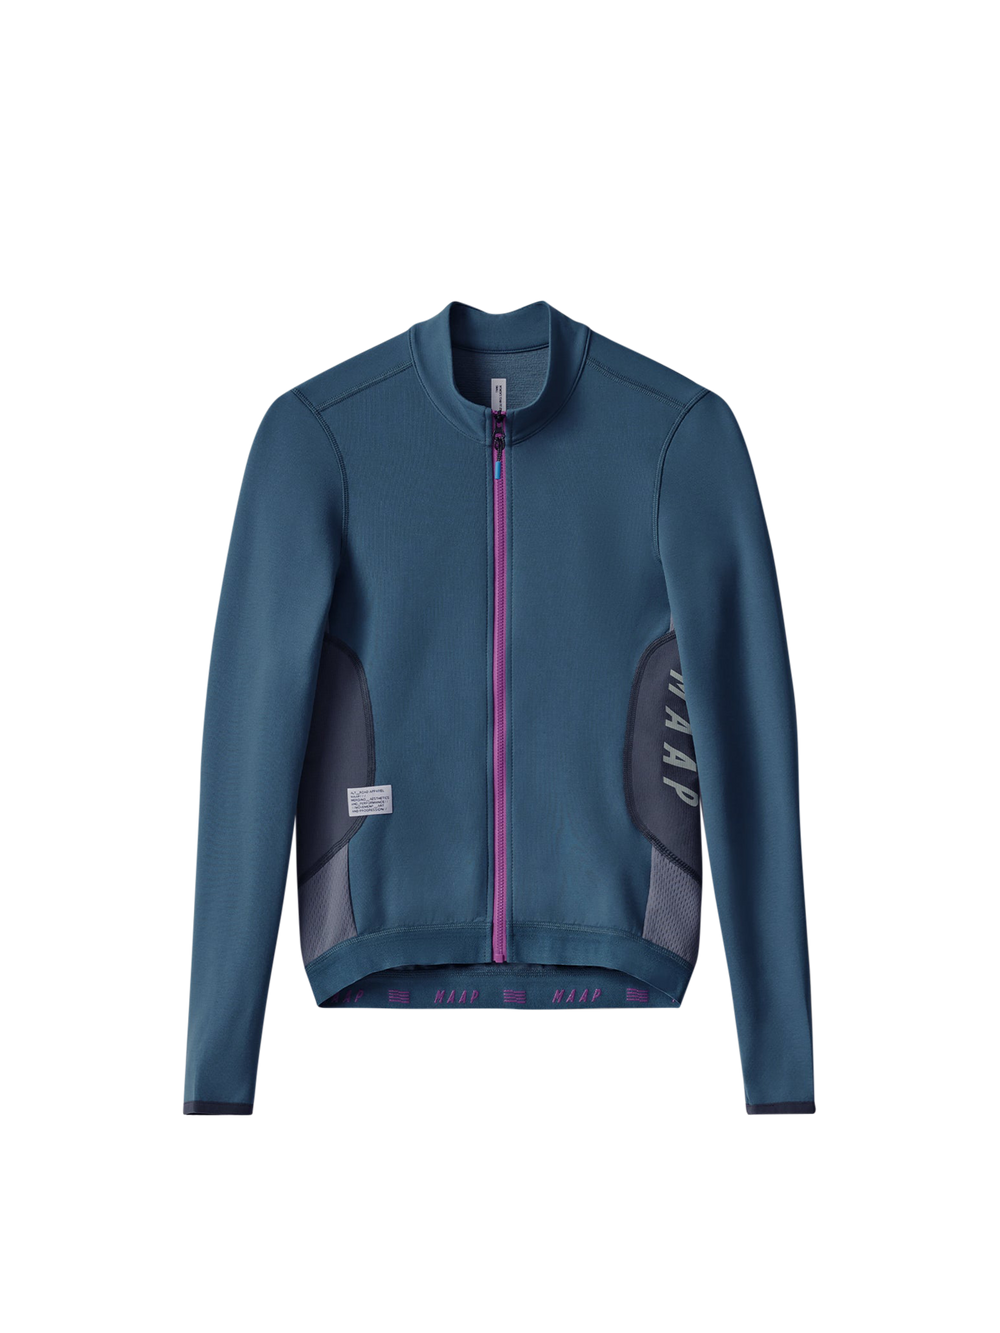 Product Image for Women's Alt_Road LS Jersey